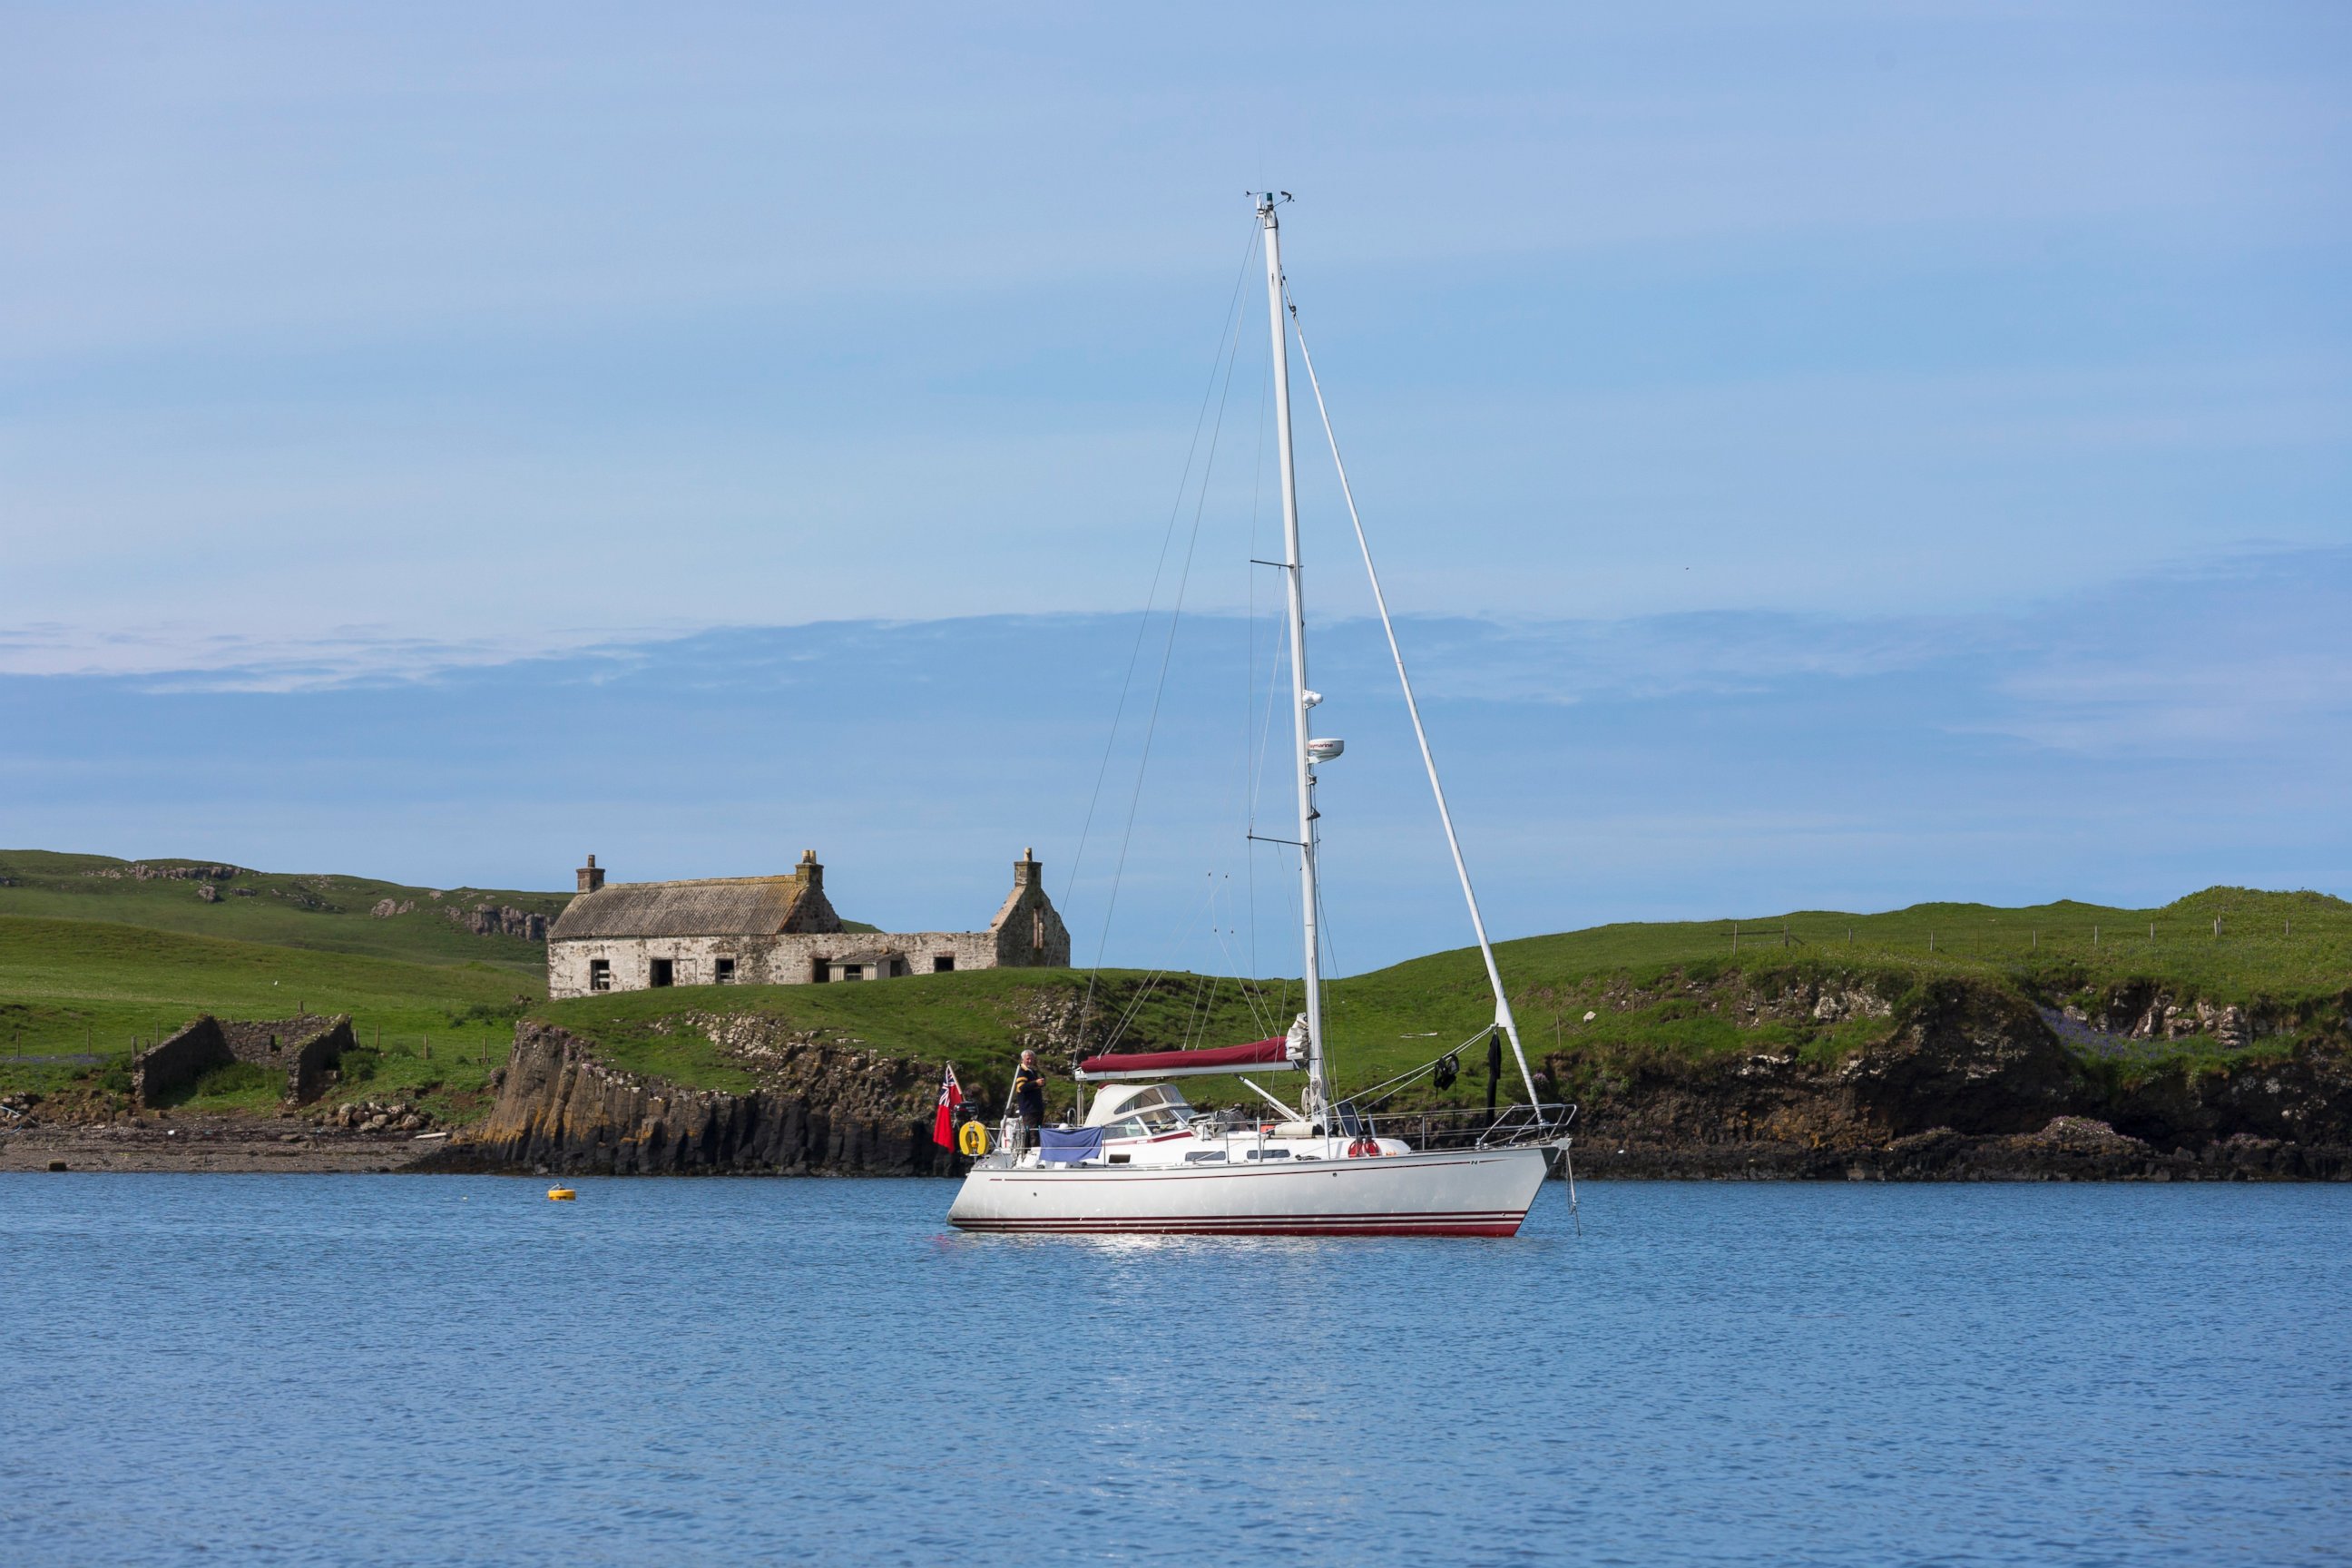 PHOTO: A boat sails past the former Catholic Church on the Isle of Canna, part of the Inner Hebrides and the Western Isles of Scotland, June 4, 2014.